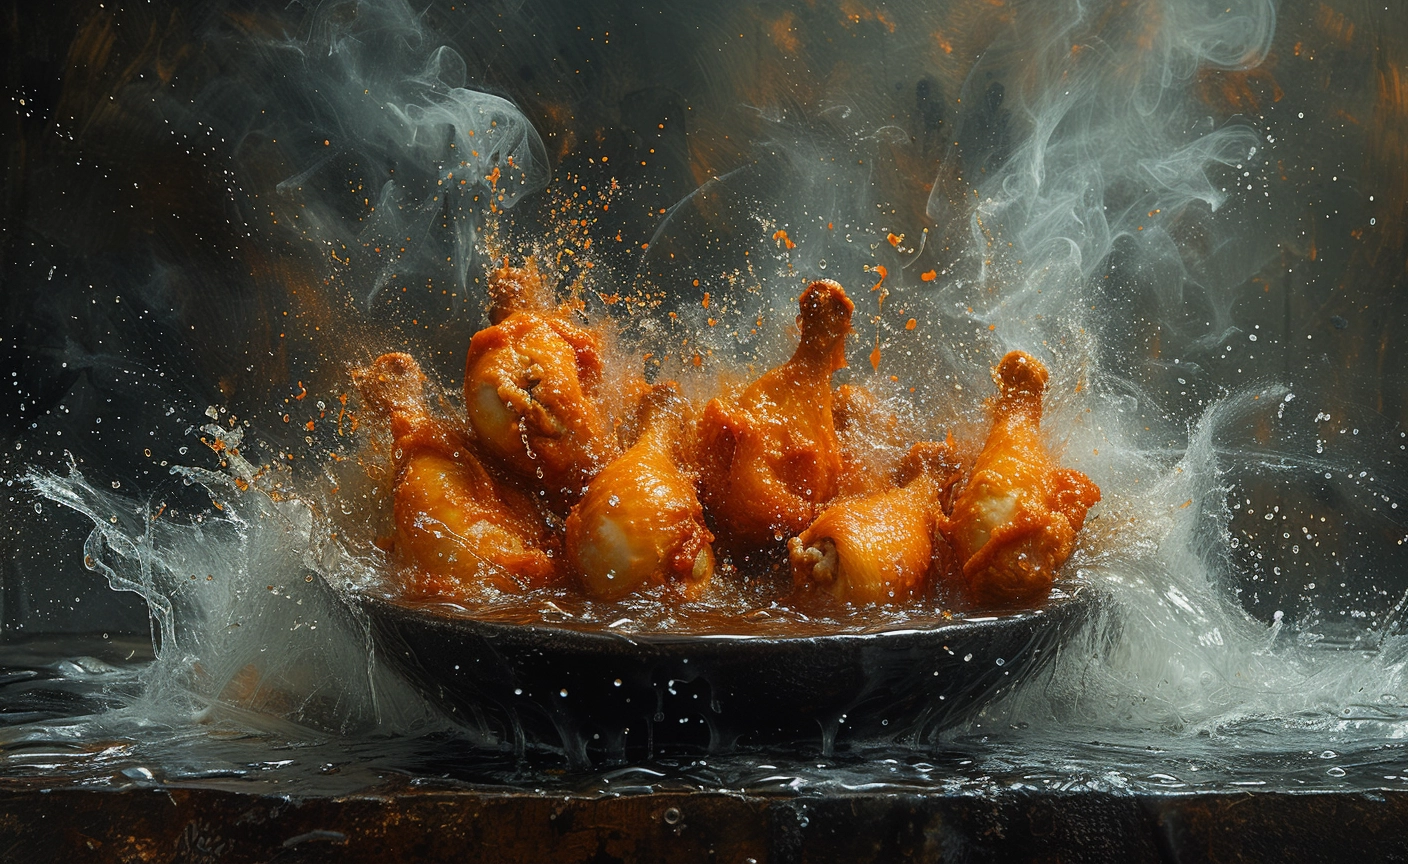 An action shot in a brightly lit kitchen capturing hands meticulously seasoning chicken breasts with a mixture of spices including red chili flakes, paprika, and black pepper, with a bowl of mixed spices and a bottle of olive oil visible on the marble countertop.